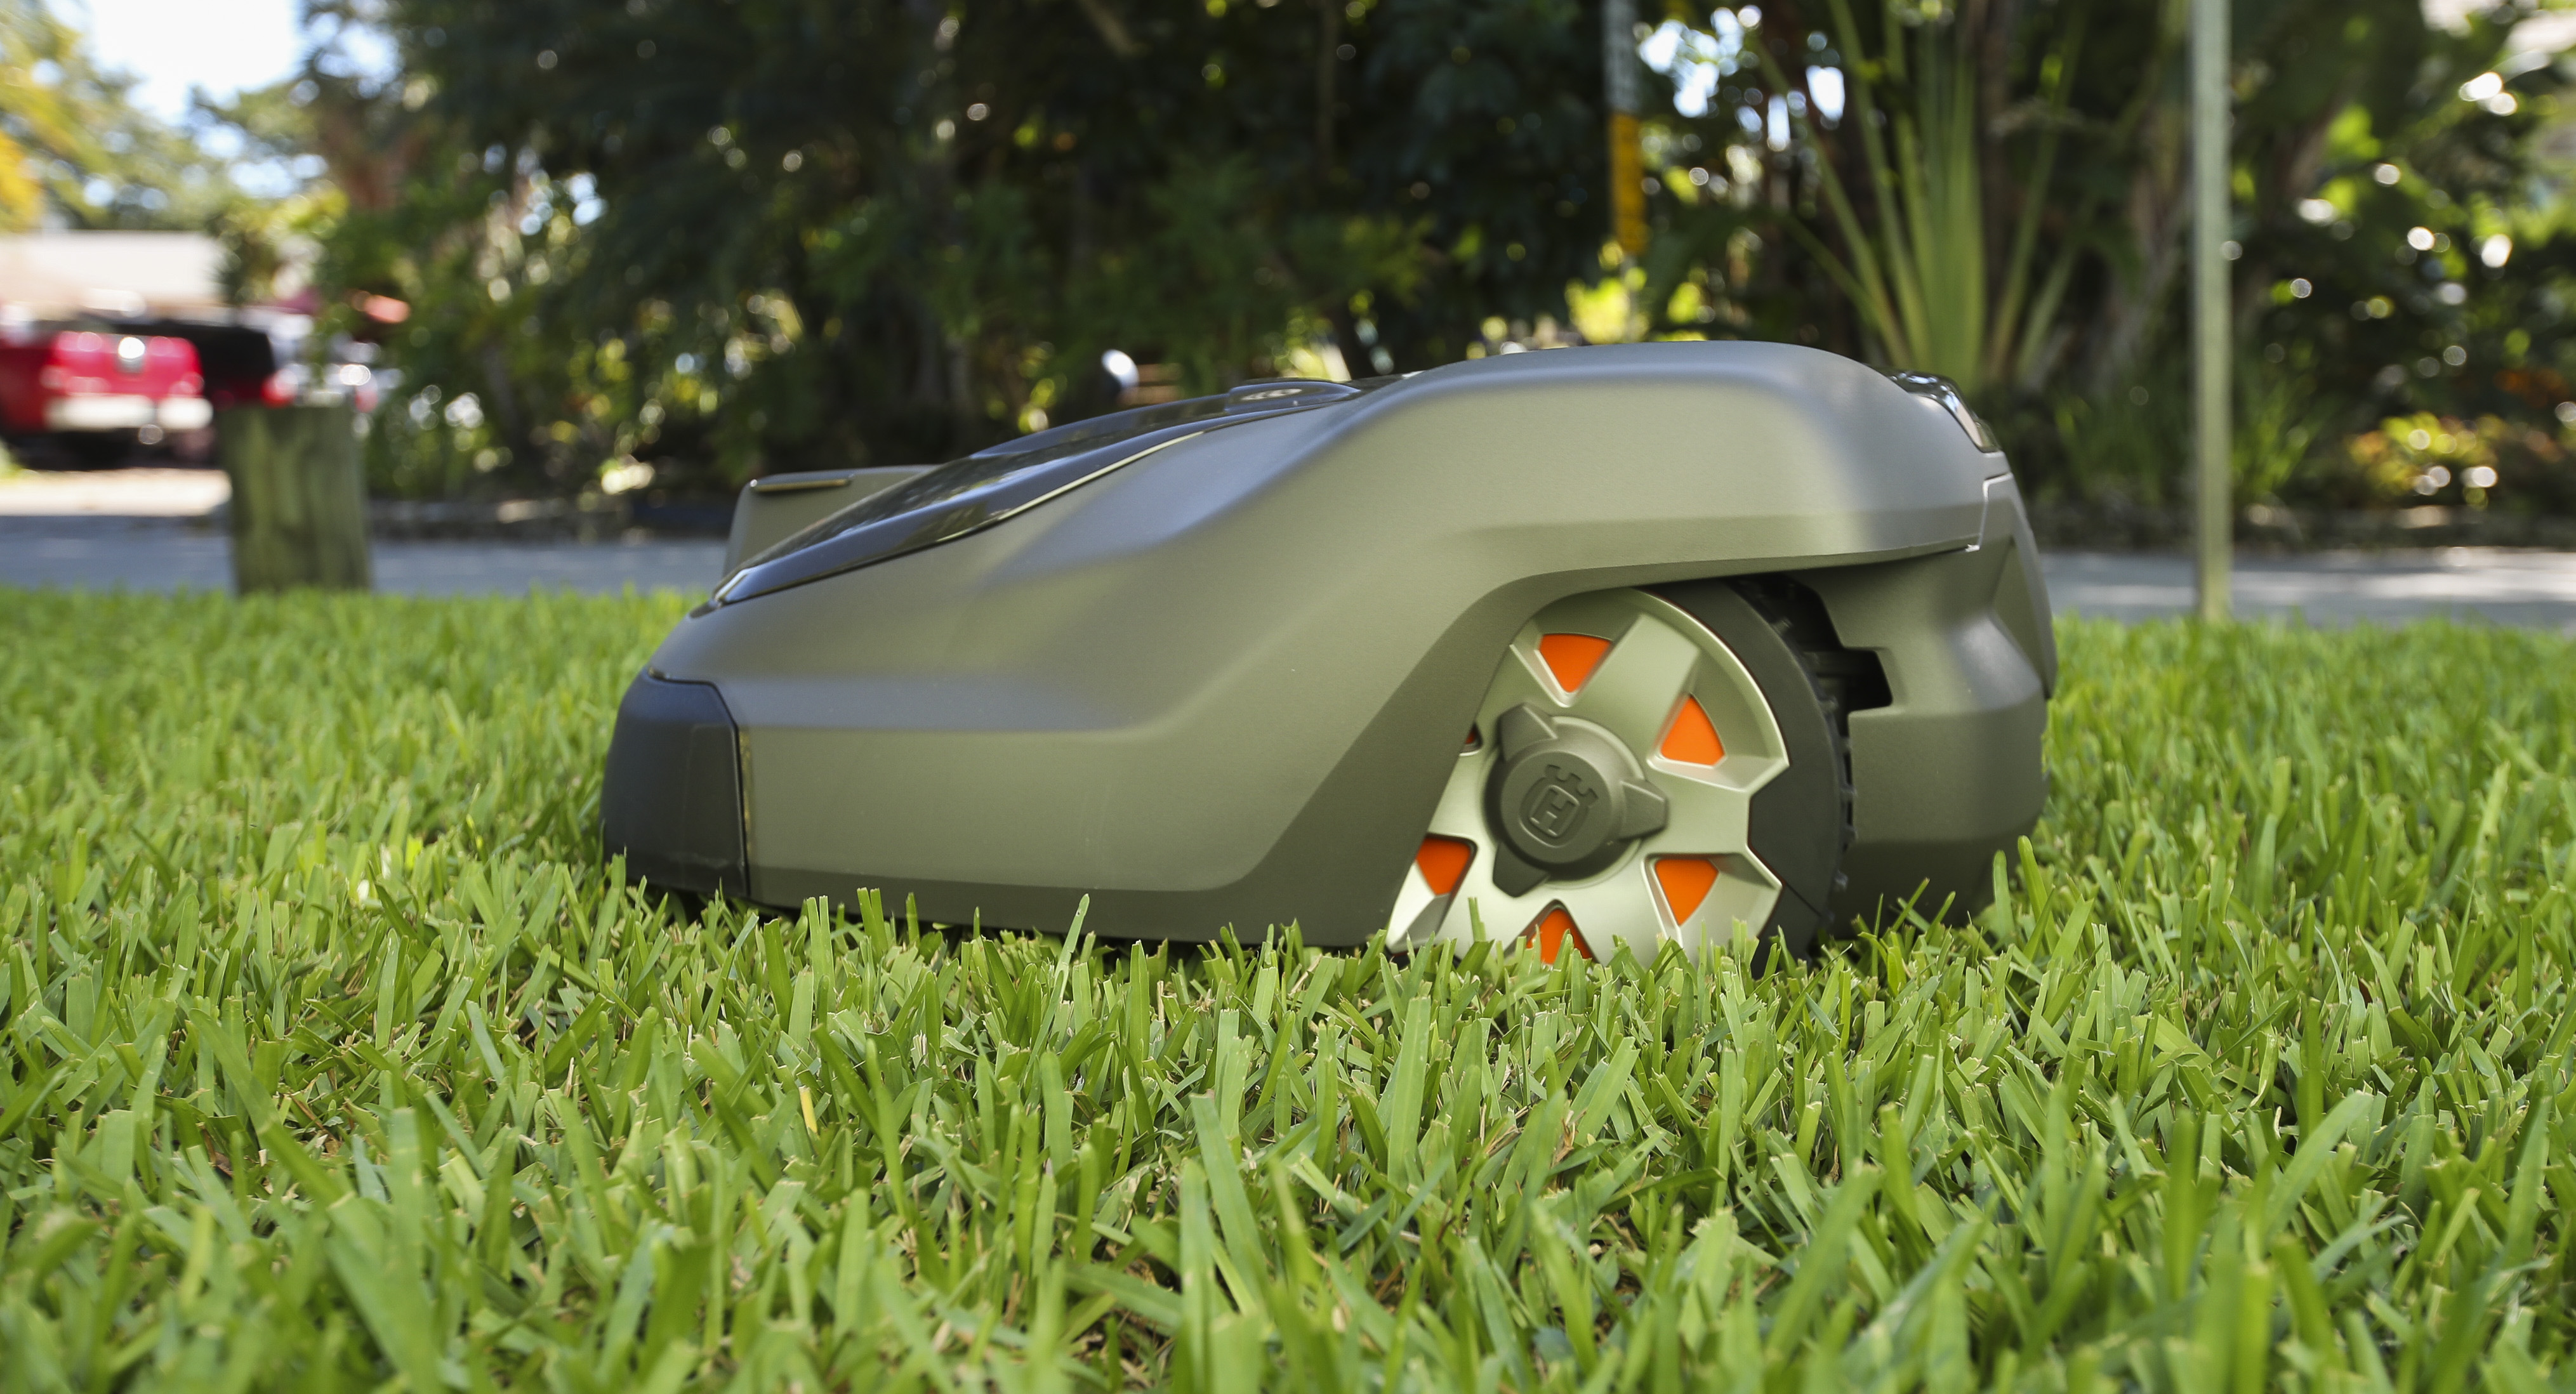 Yes, Tampa Bay, that's little Roomba-like robot mowing the lawn